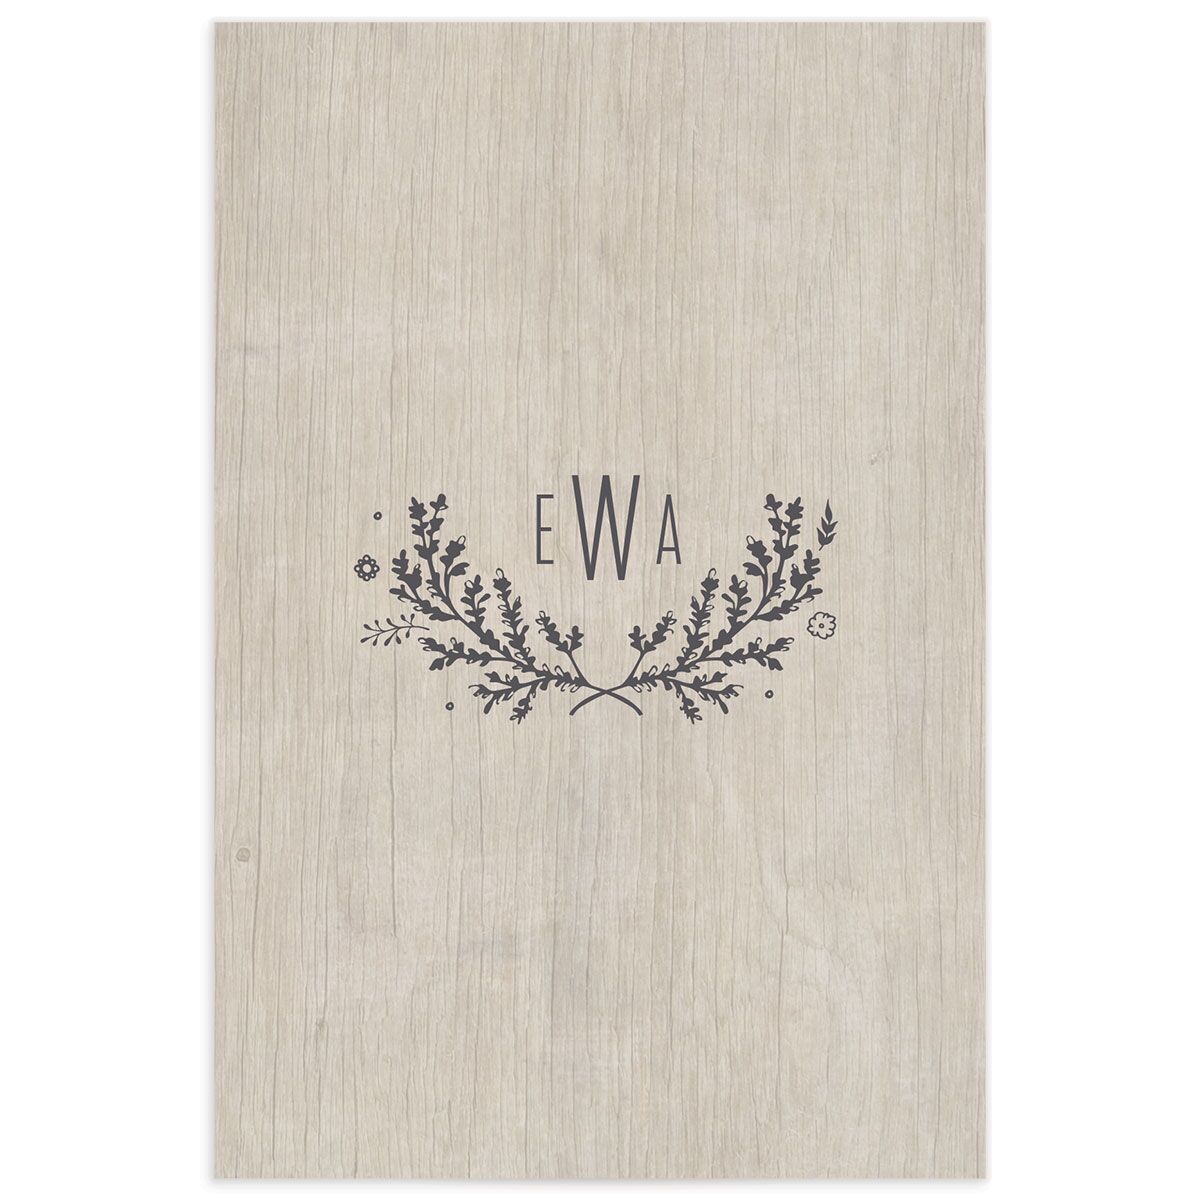 Rustic Romance Table Numbers back in Silver